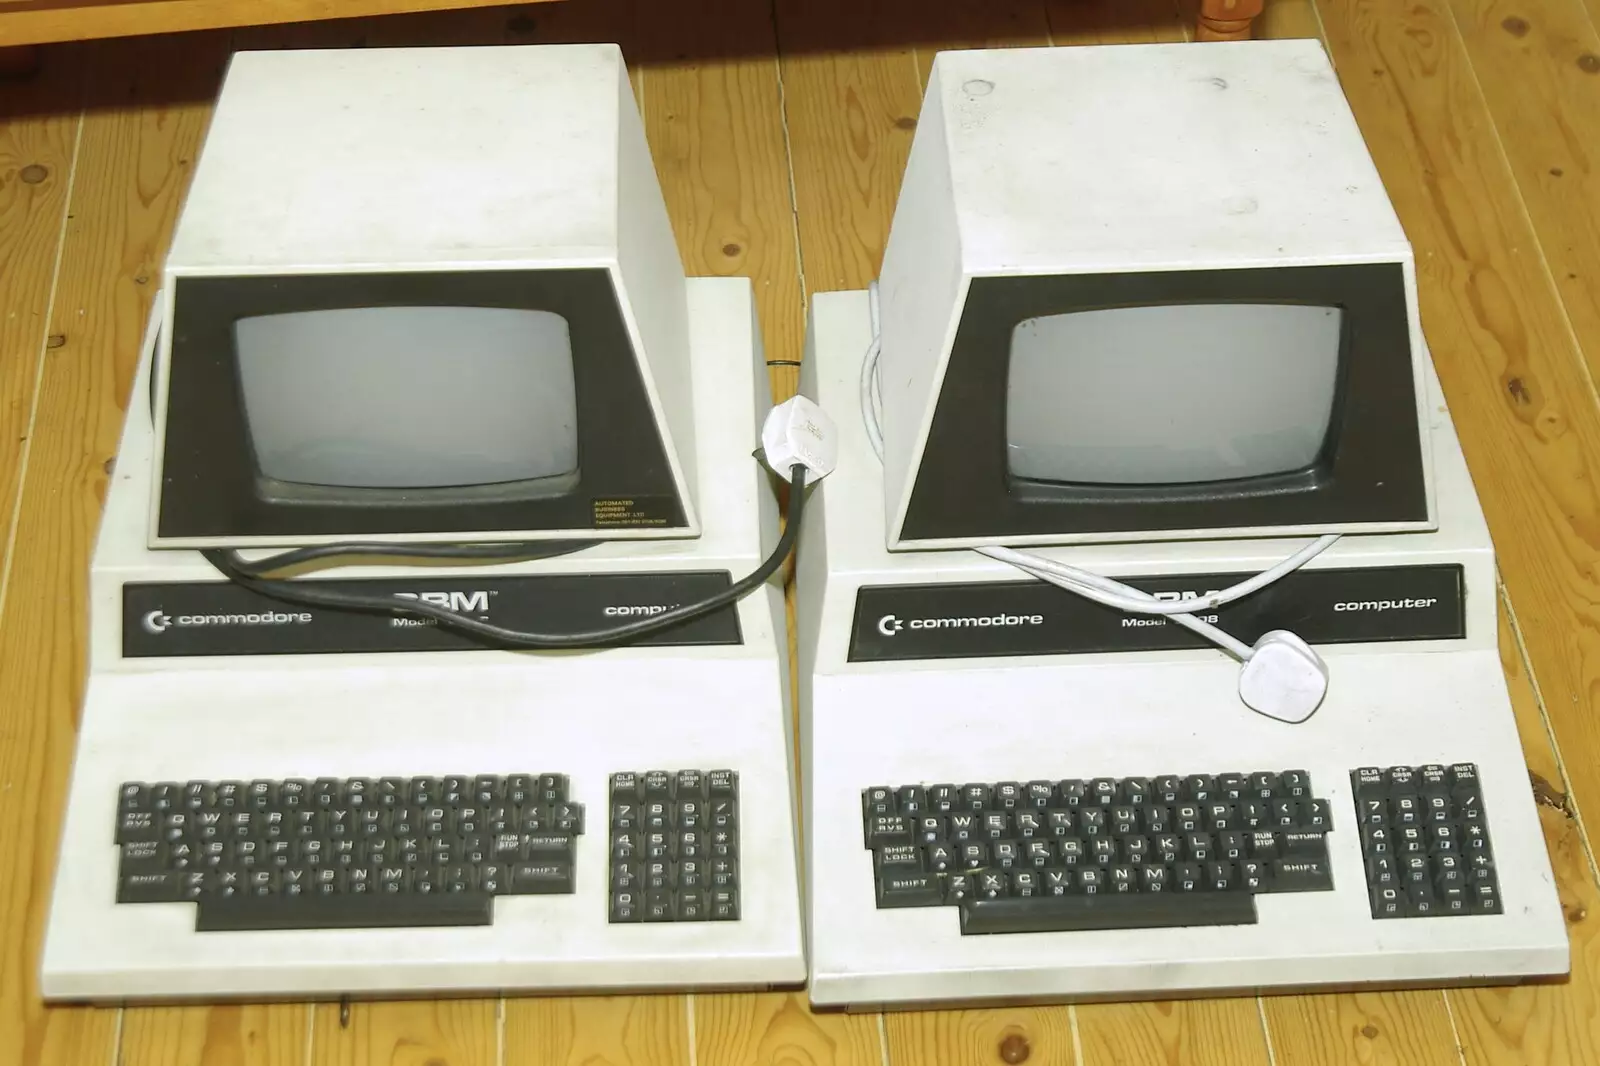 A pair of Commodore PETs, from Wrecked Cars, A Night Out and Stick Game in the Cherry Tree, Cambridge and Yaxley, Suffolk- 24th February 2006